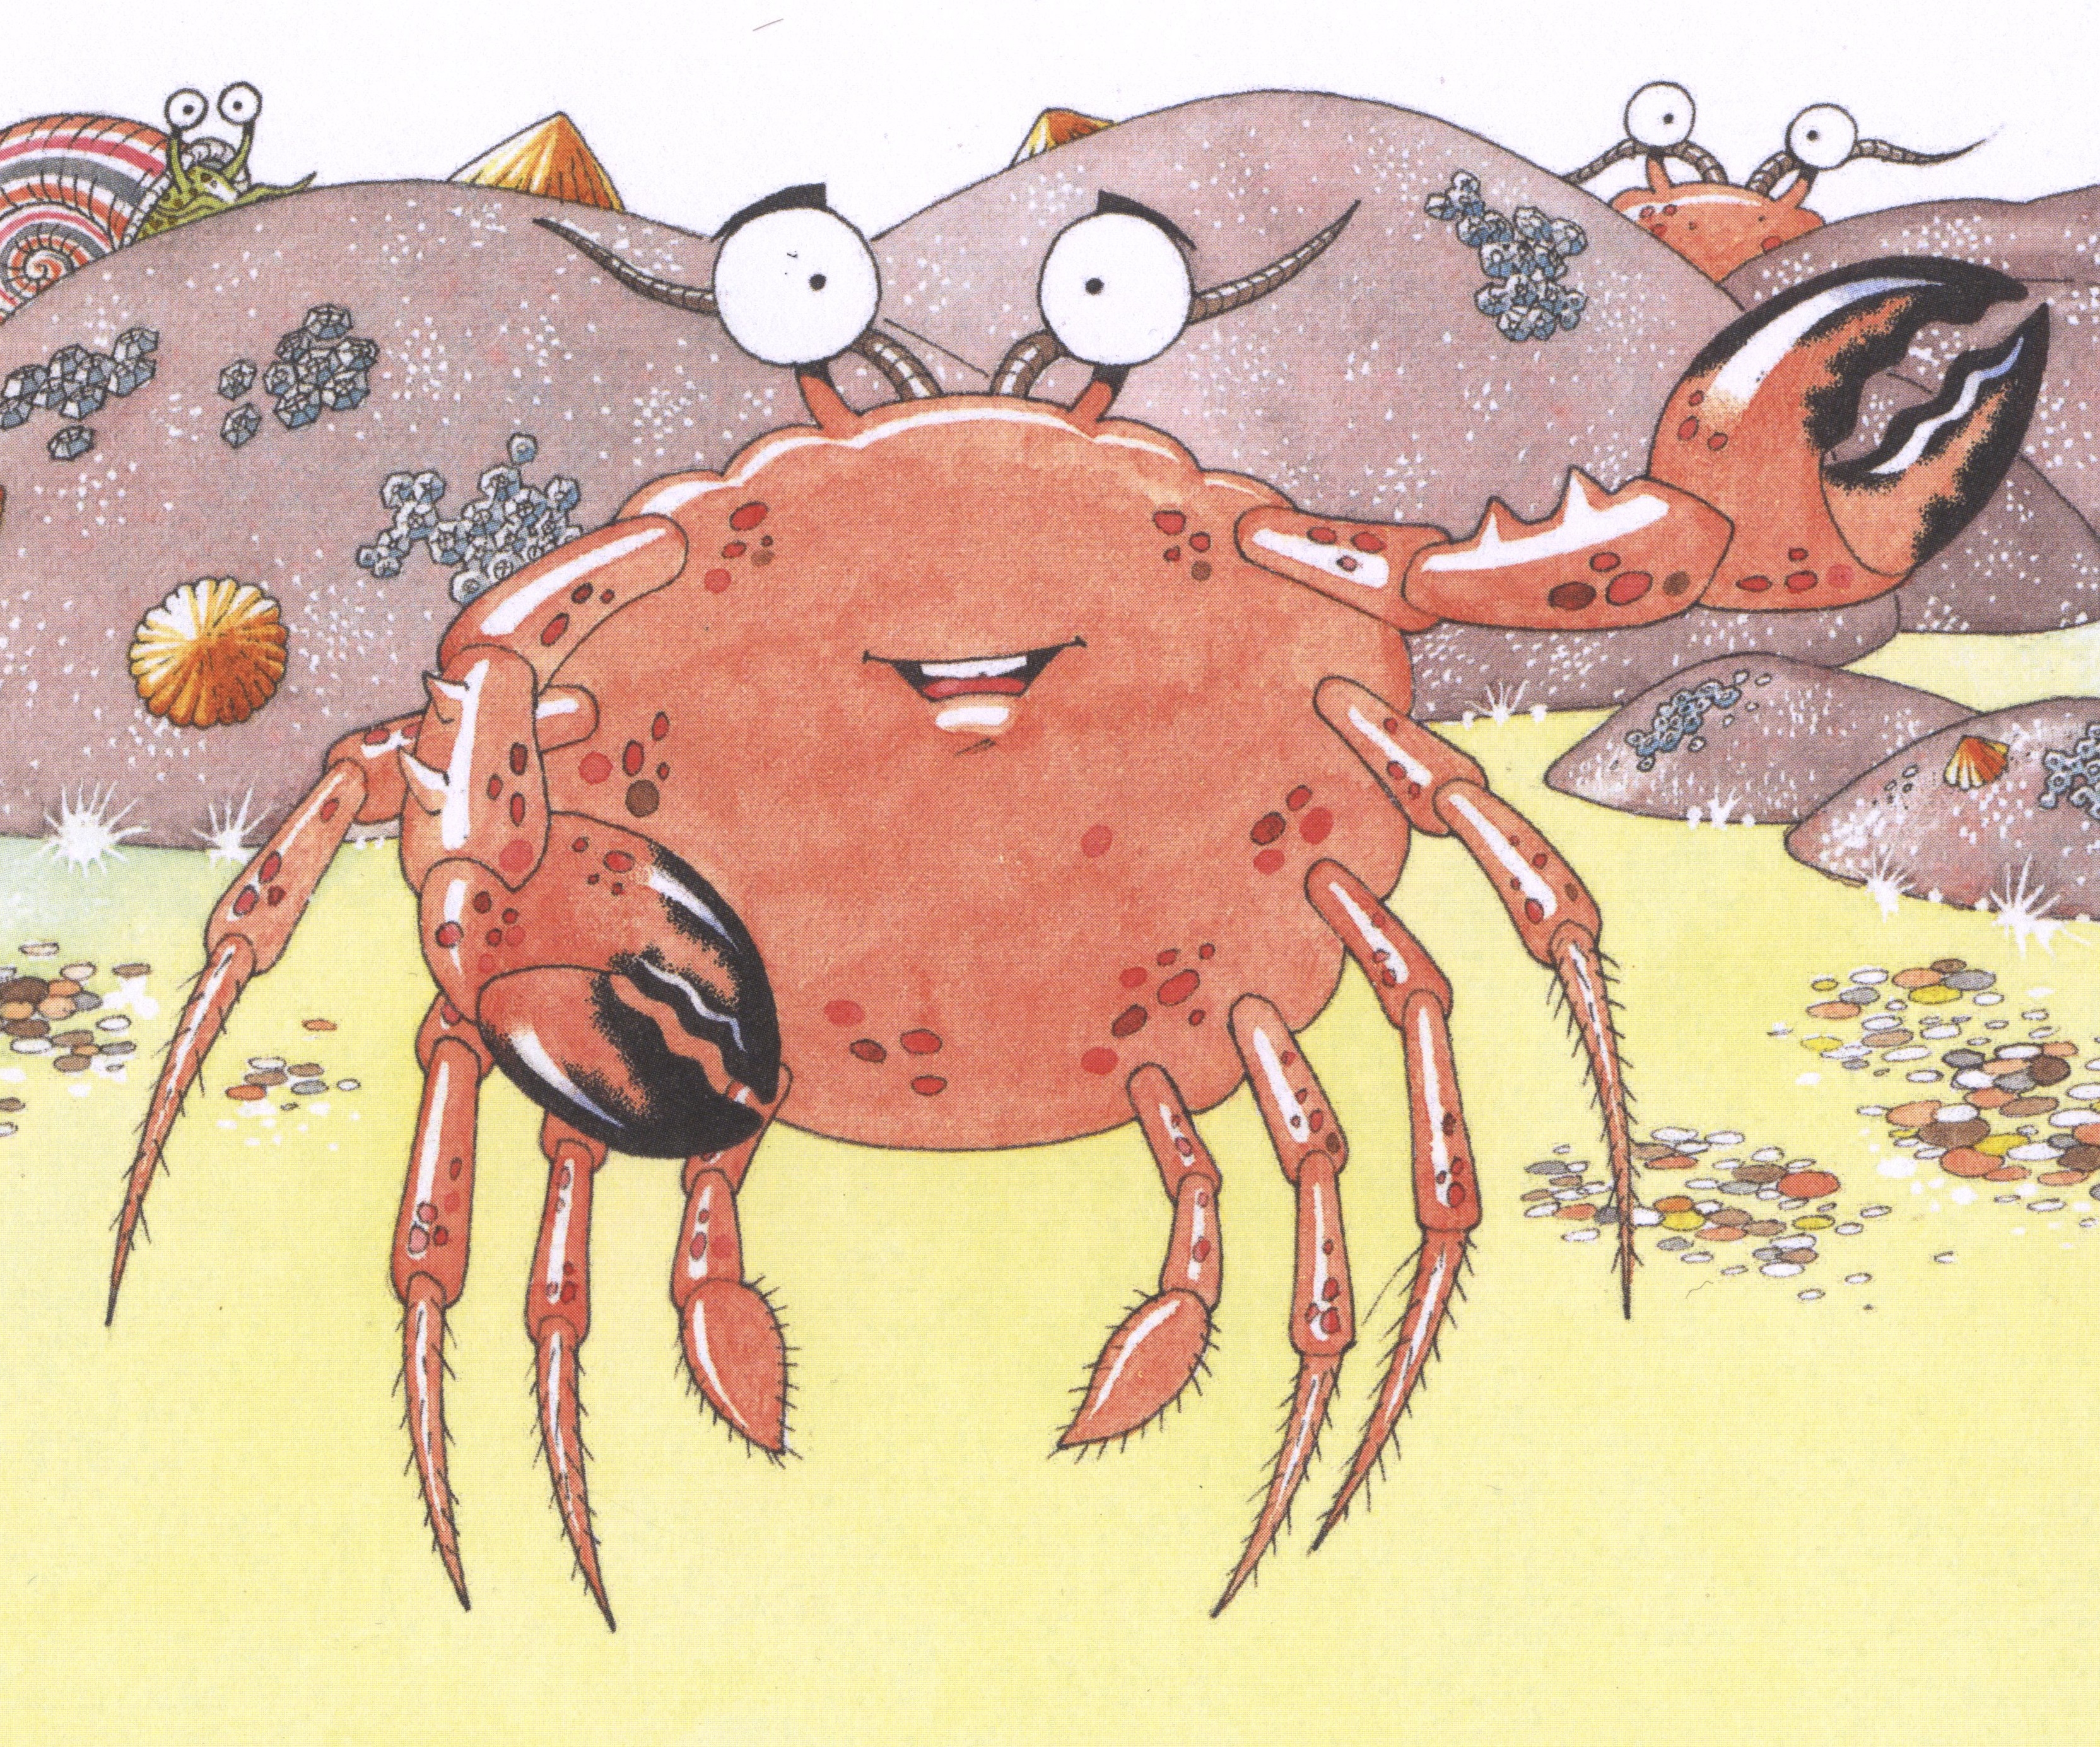 Clarence the crab